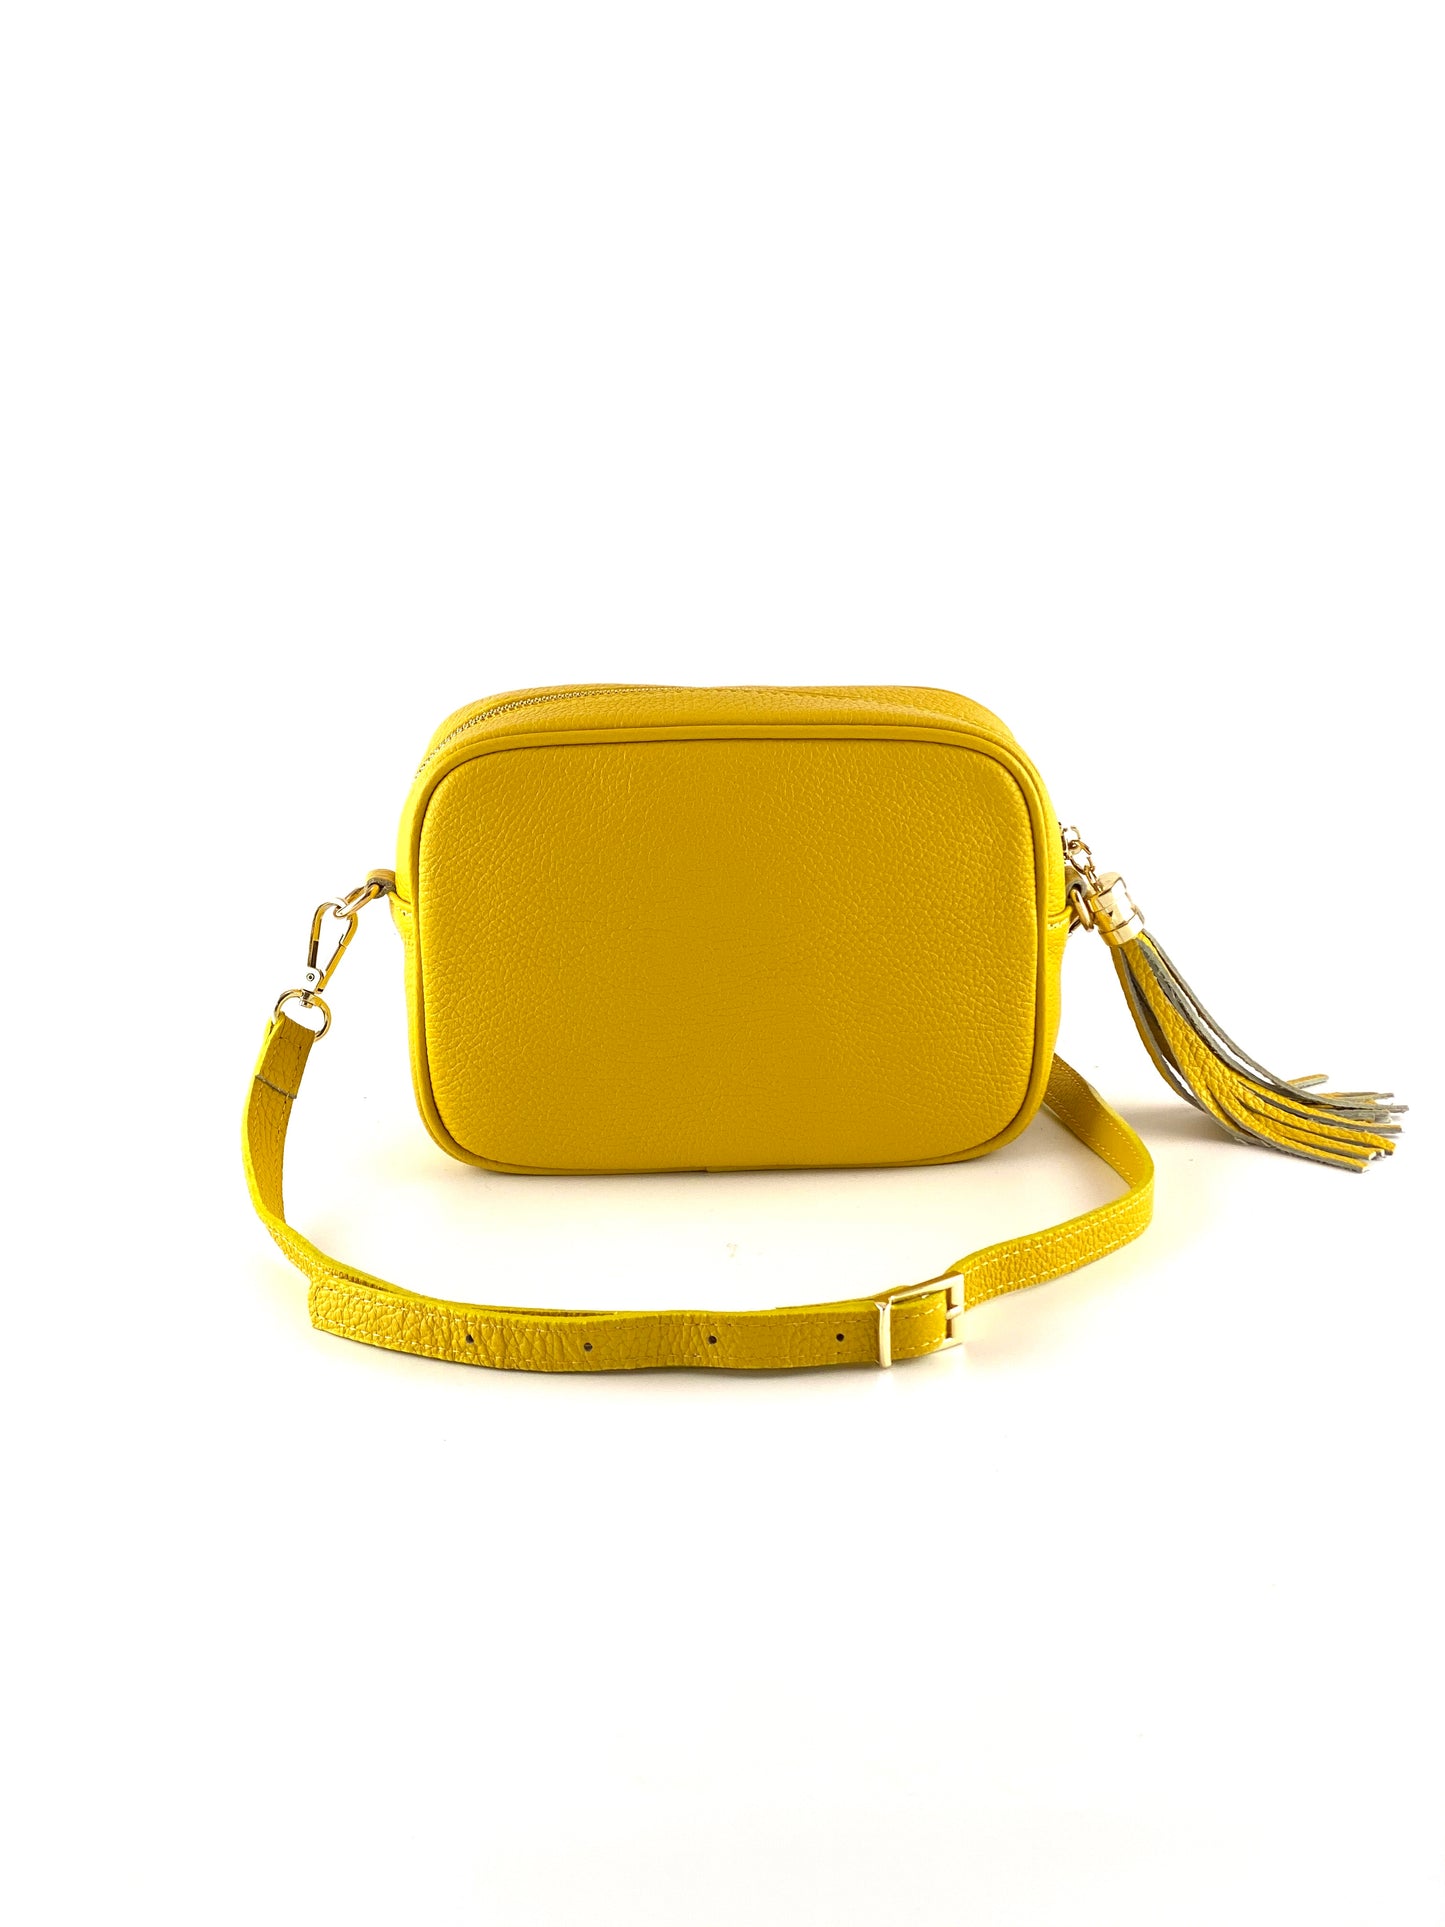 An image of a small yellow leather messenger bag with a leather tassel on the zip which opens across the top of the bag.